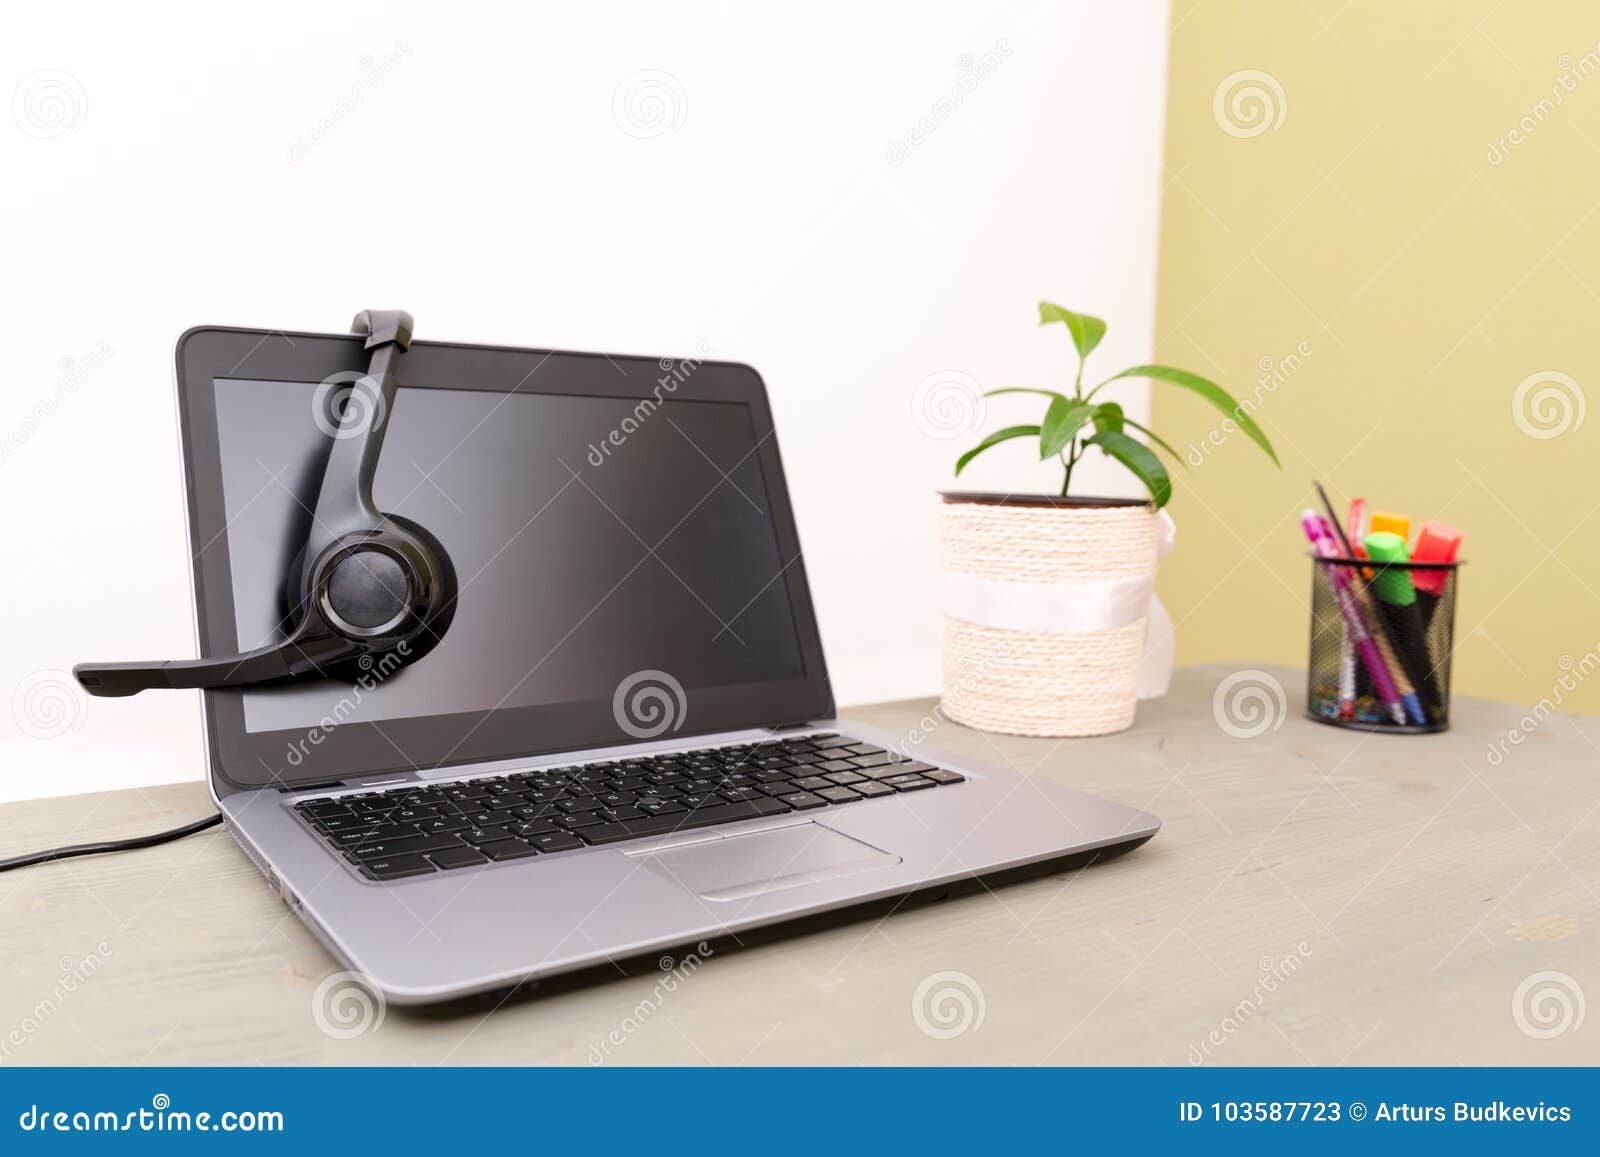 Headset On Laptop Computer Concept For Communication It Support